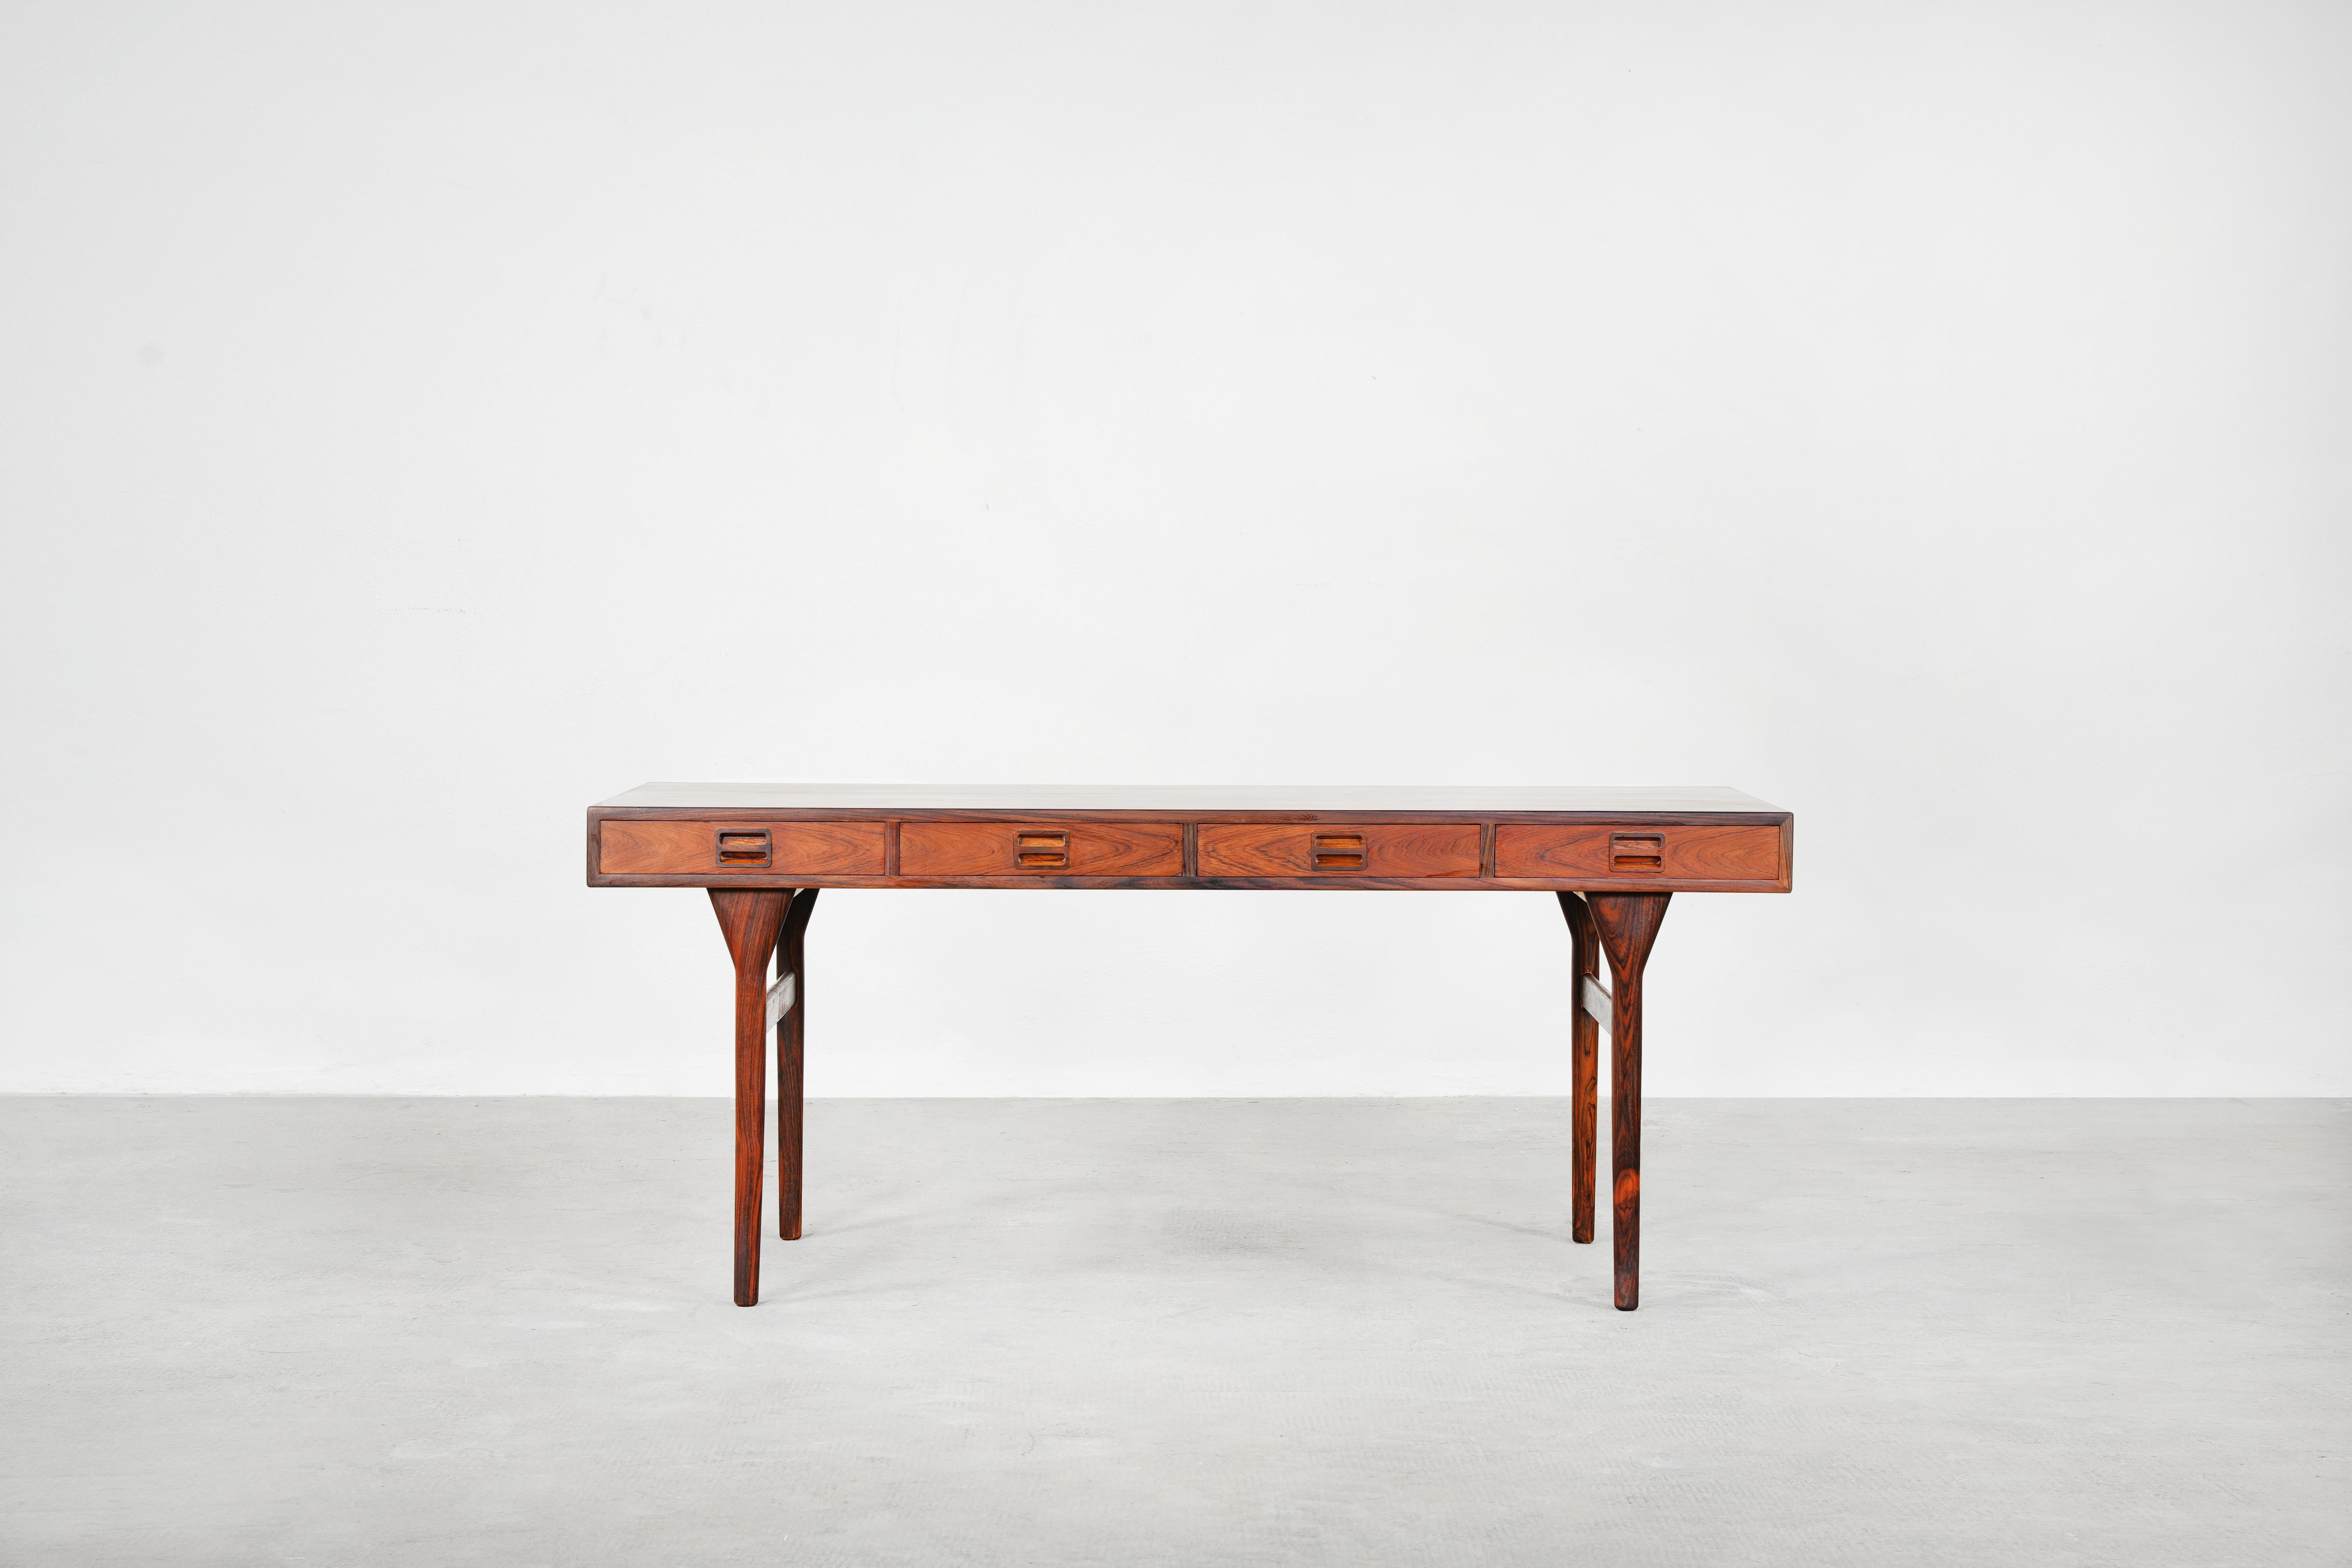 Very beautiful desk designed by Nanna Ditzel for Søren Willadsen, 1955 in Denmark.
The desk is in very excellent condition without any damages, deeper scratches or dents.
Labeled with Søren Willadsen.

We offer worldwide shipping.